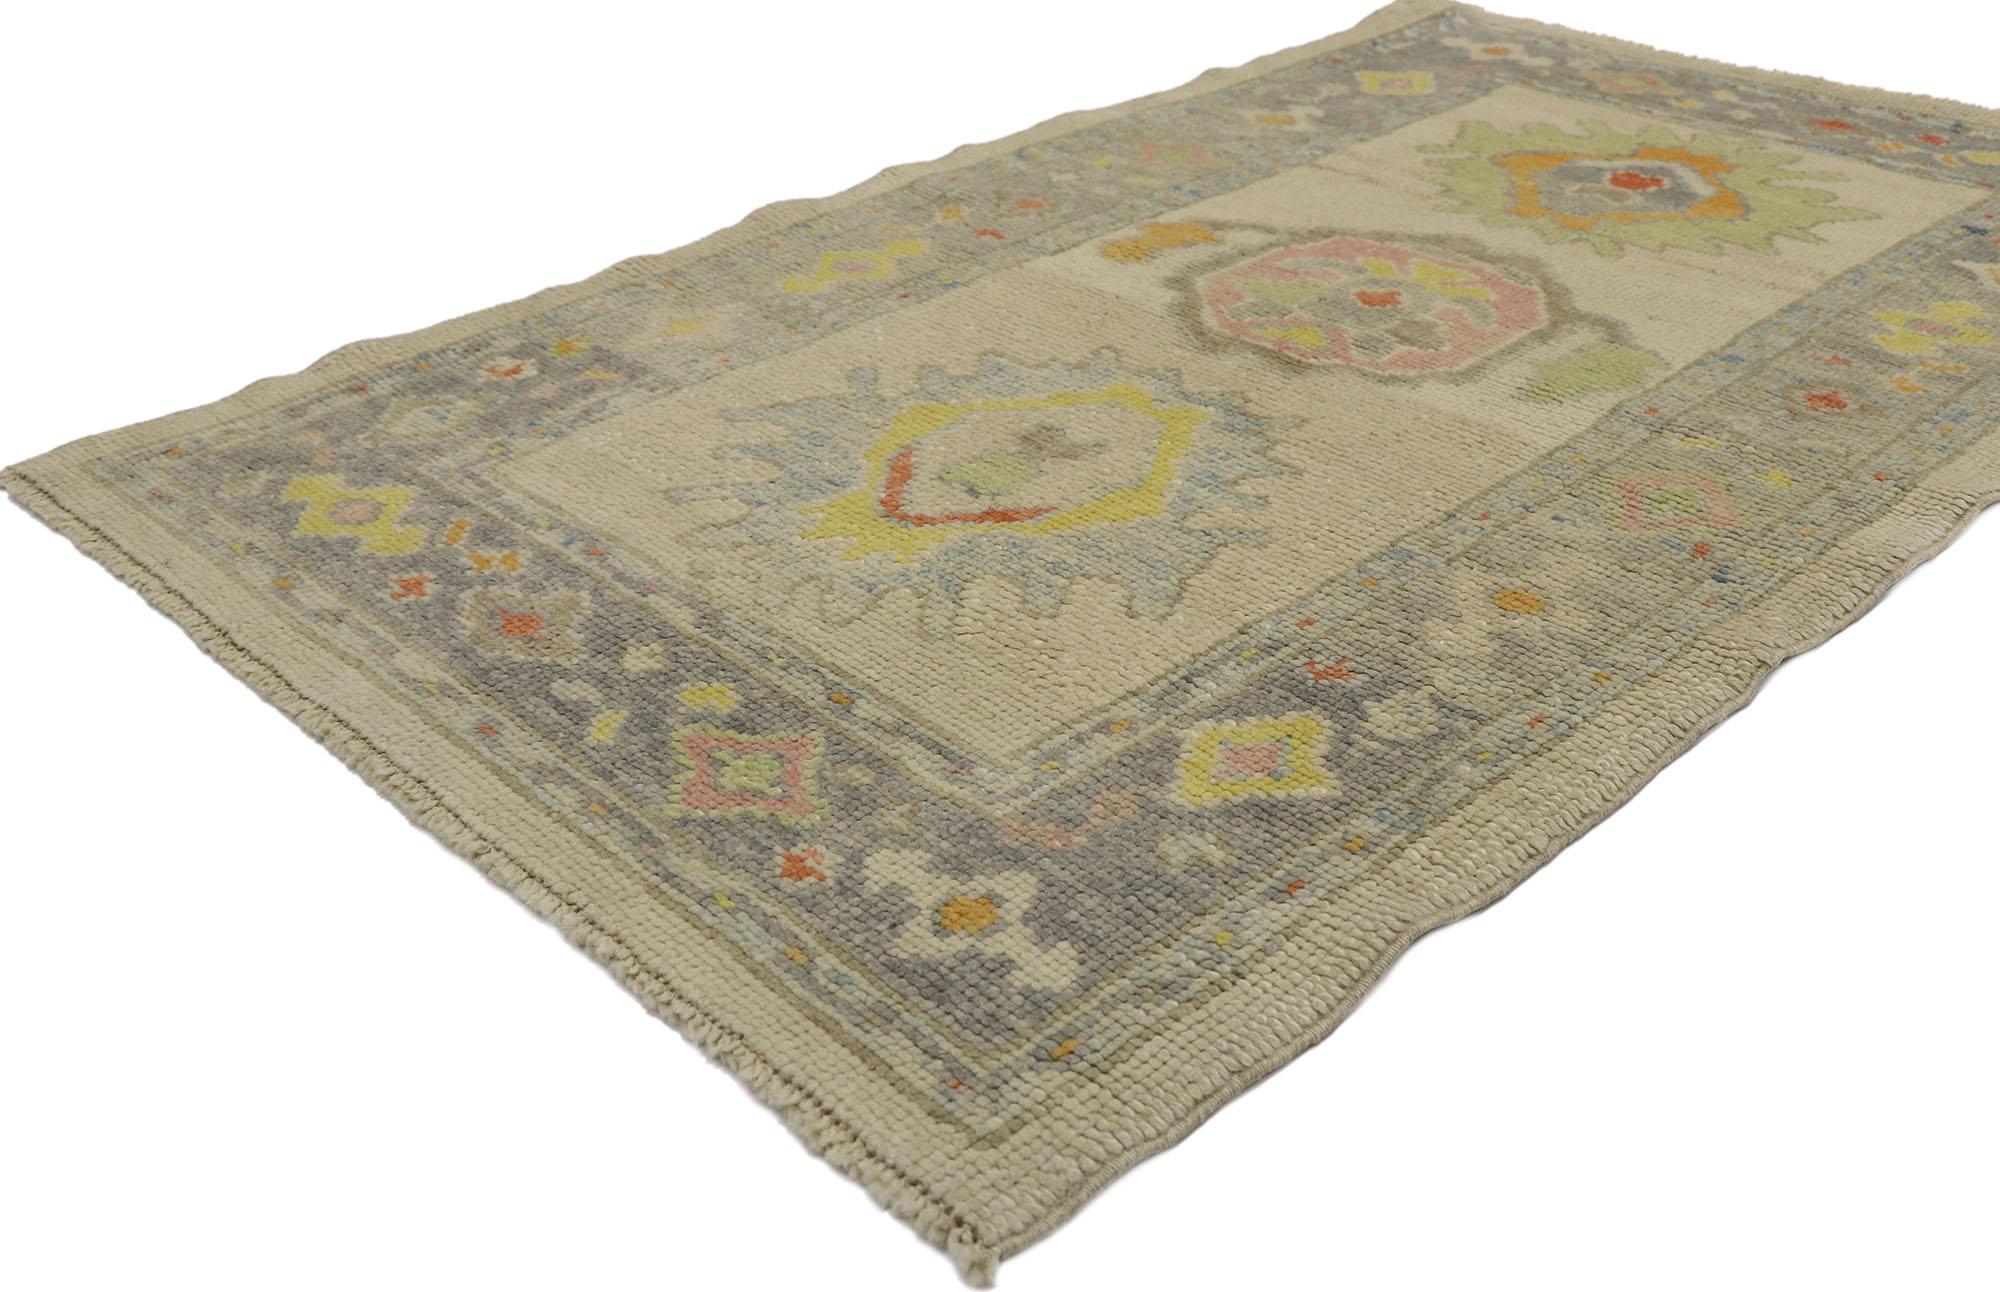 53594 New Contemporary Turkish Oushak rug with Modern Style 03'01 x 05'00. Polished and playful, this hand-knotted wool small Turkish Oushak rug beautifully embodies a modern style. The abrashed oatmeal colored field features three colorful